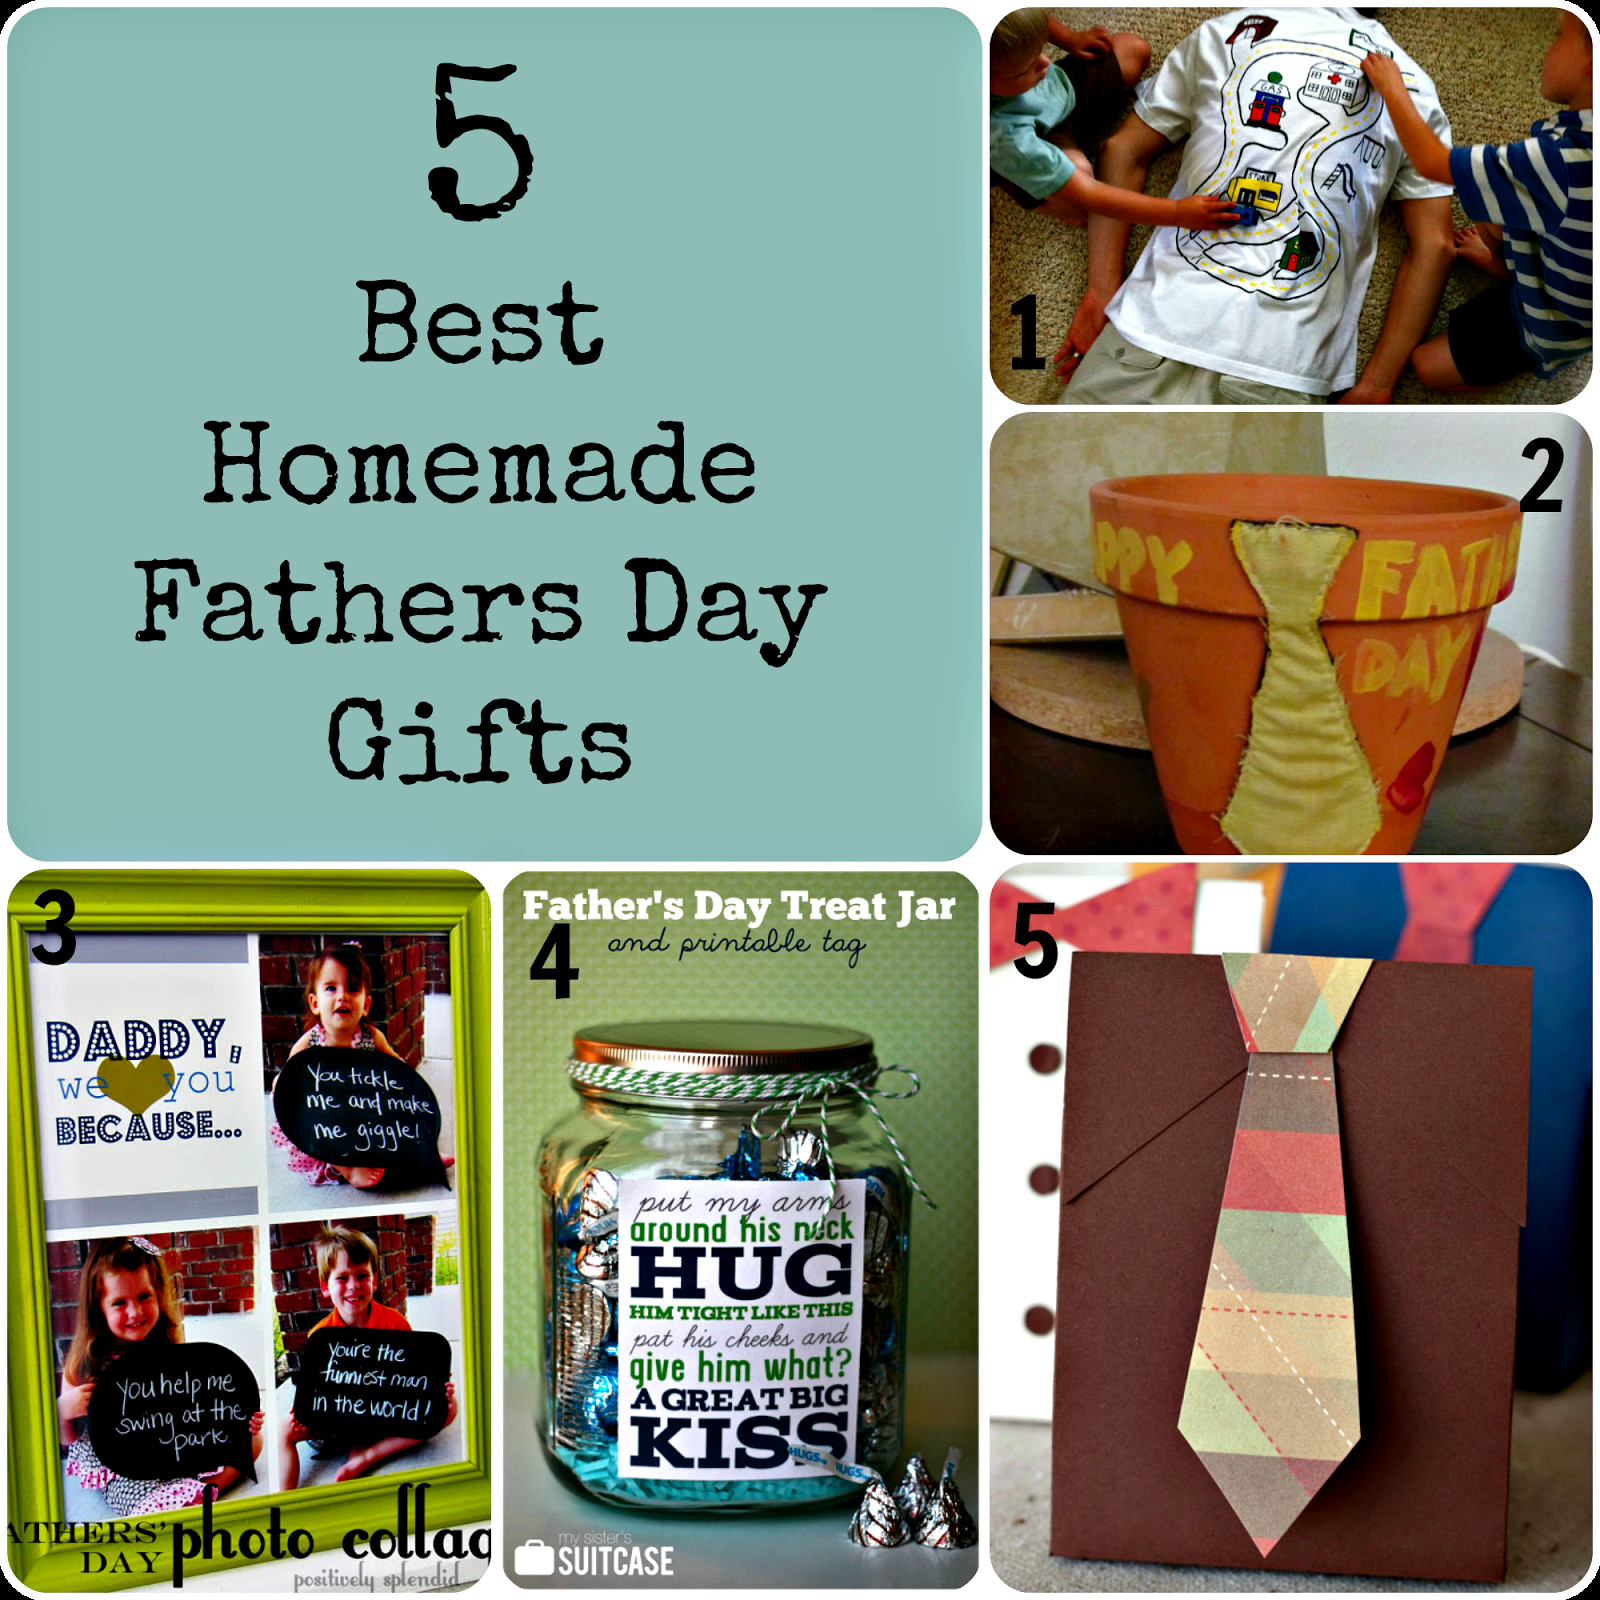 Homemade Birthday Gift Ideas For Dad From Daughter
 Home Maid Simple 5 Best homemade Fathers Day GIfts